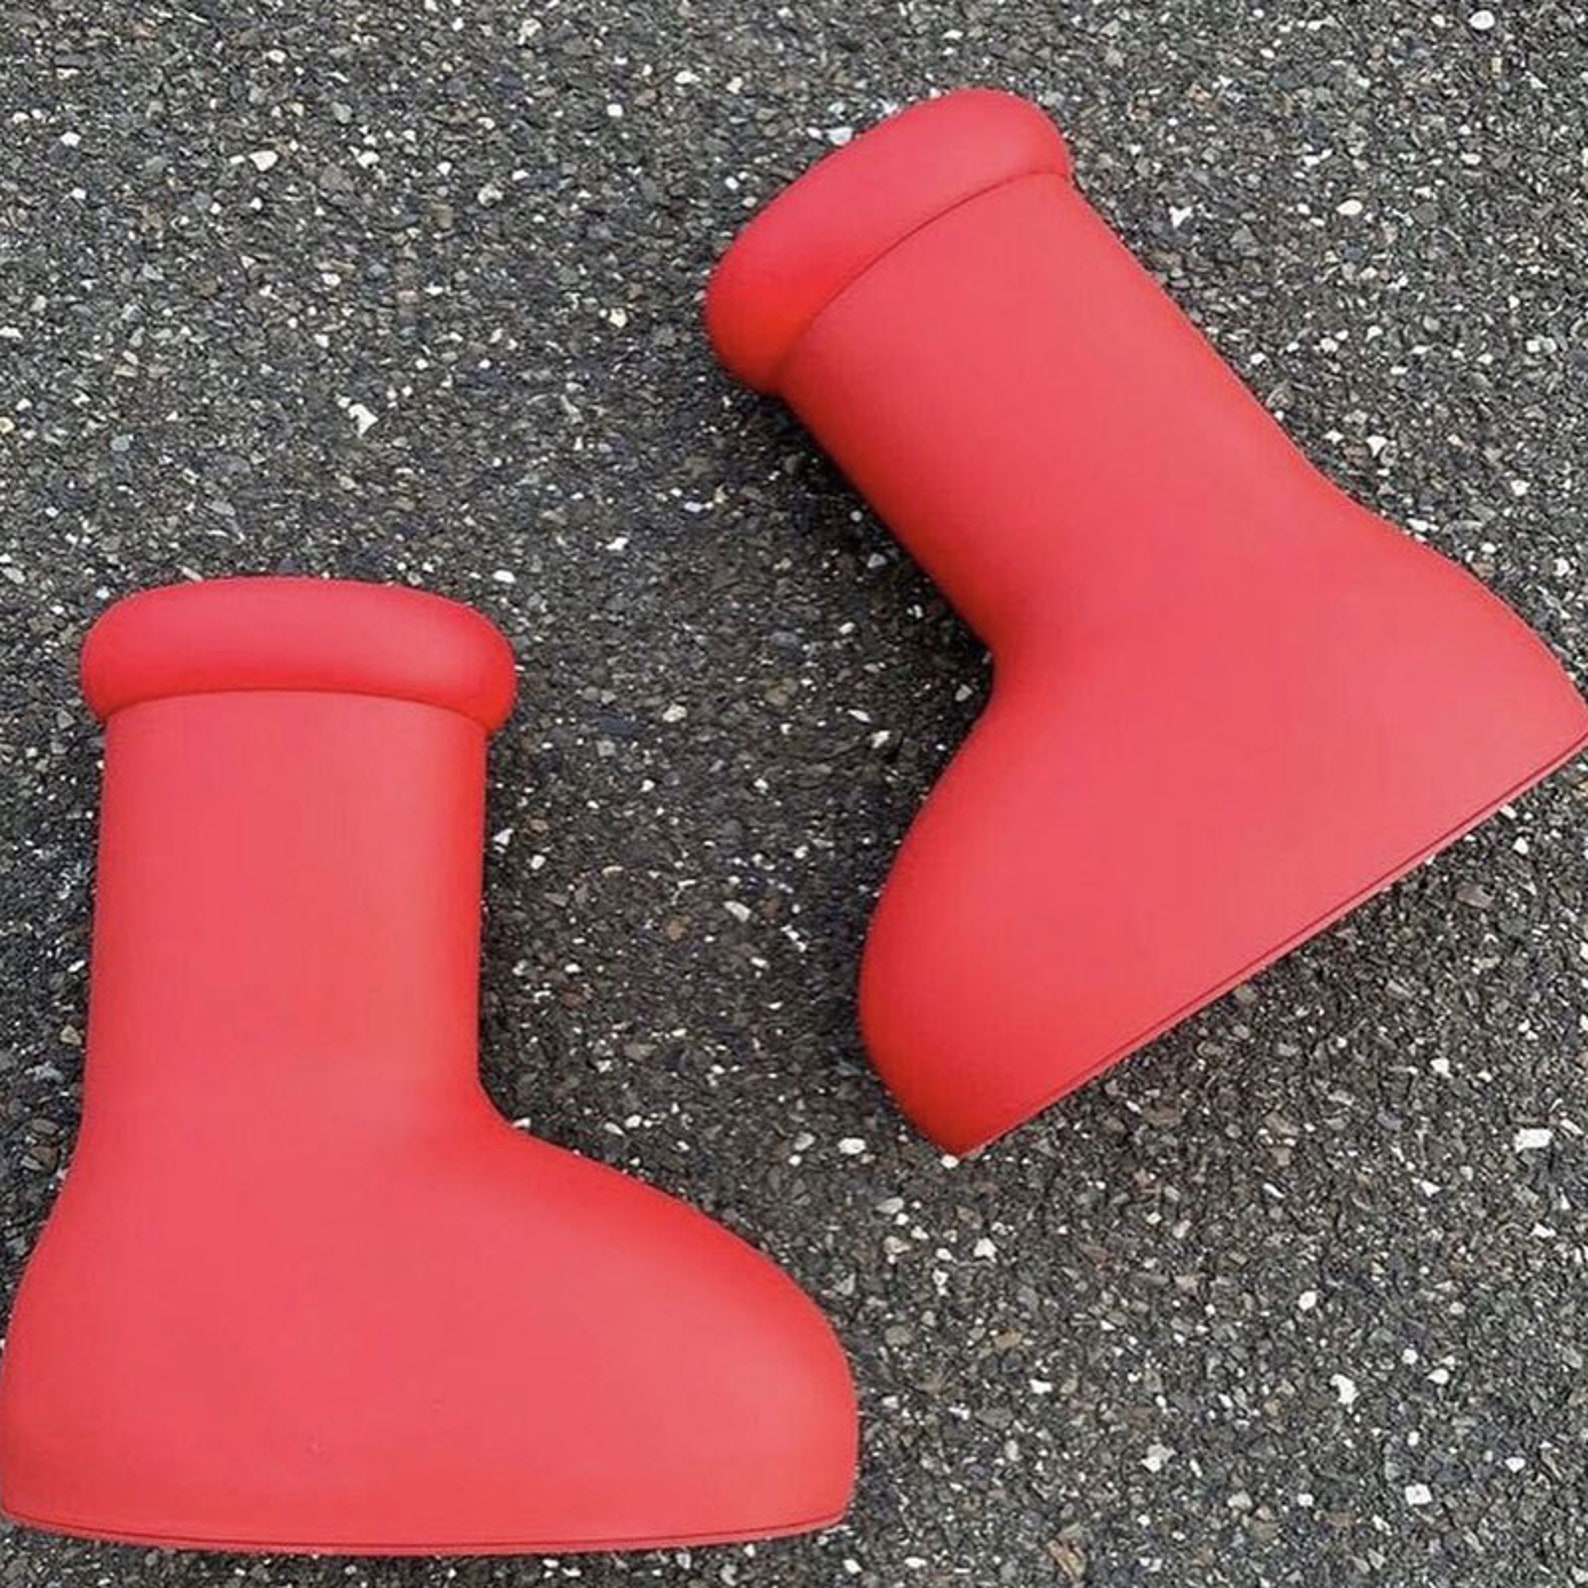 Astro Boy Big Red Rubber Boots - Etsy